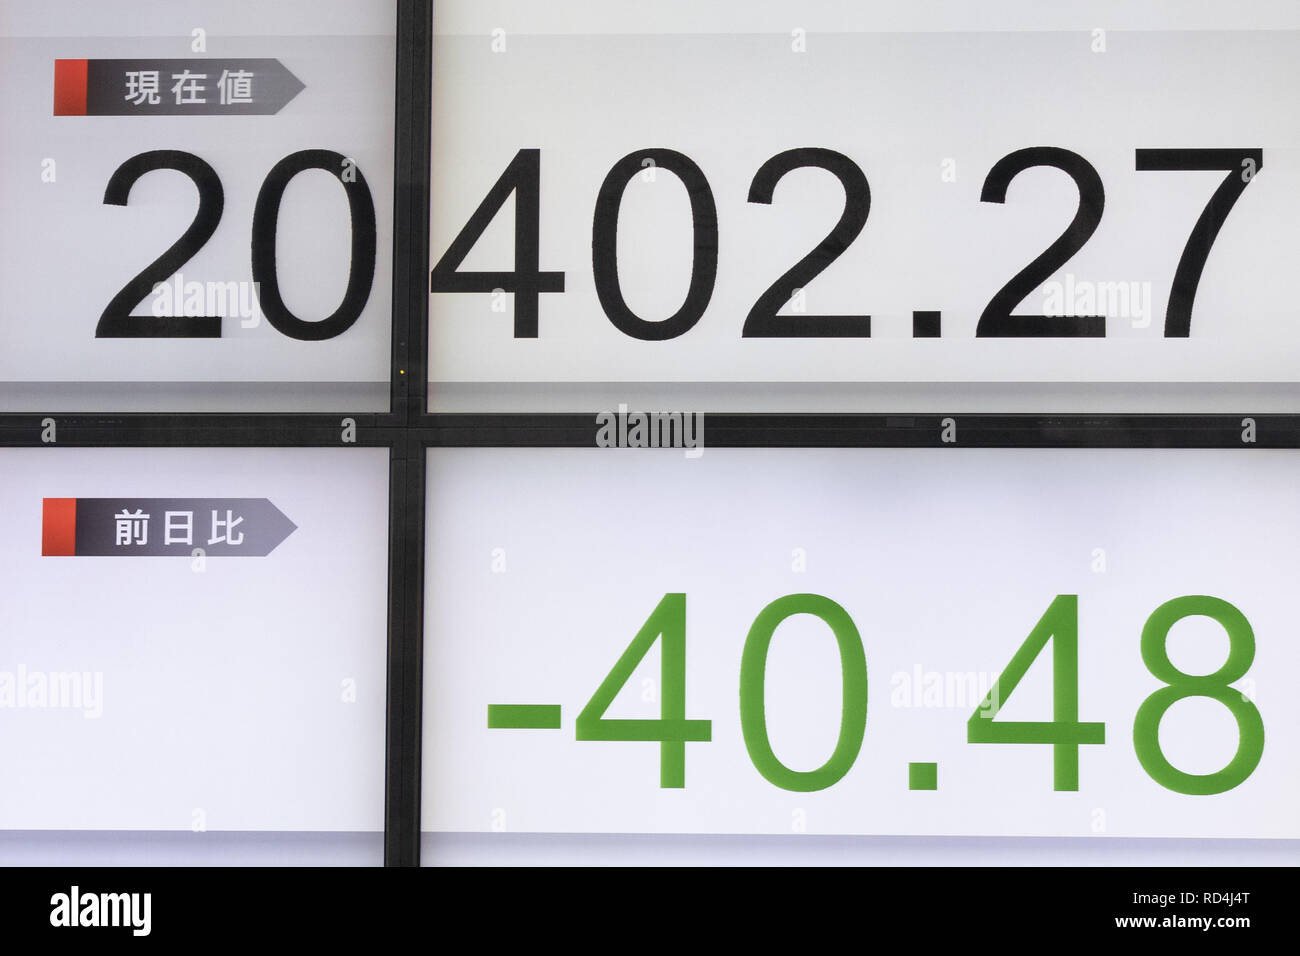 January 17, 2019 - Tokyo, Japan - An electronic stock board shows Japan's Nikkei Stock Average, which ended down 40.48 points or 0.20 percent to close at 20,402.27. The broader Topix index added 0.35 percent or 5.43 points to stand at 1,543.20. (Credit Image: © Rodrigo Reyes Marin/ZUMA Wire) Stock Photo